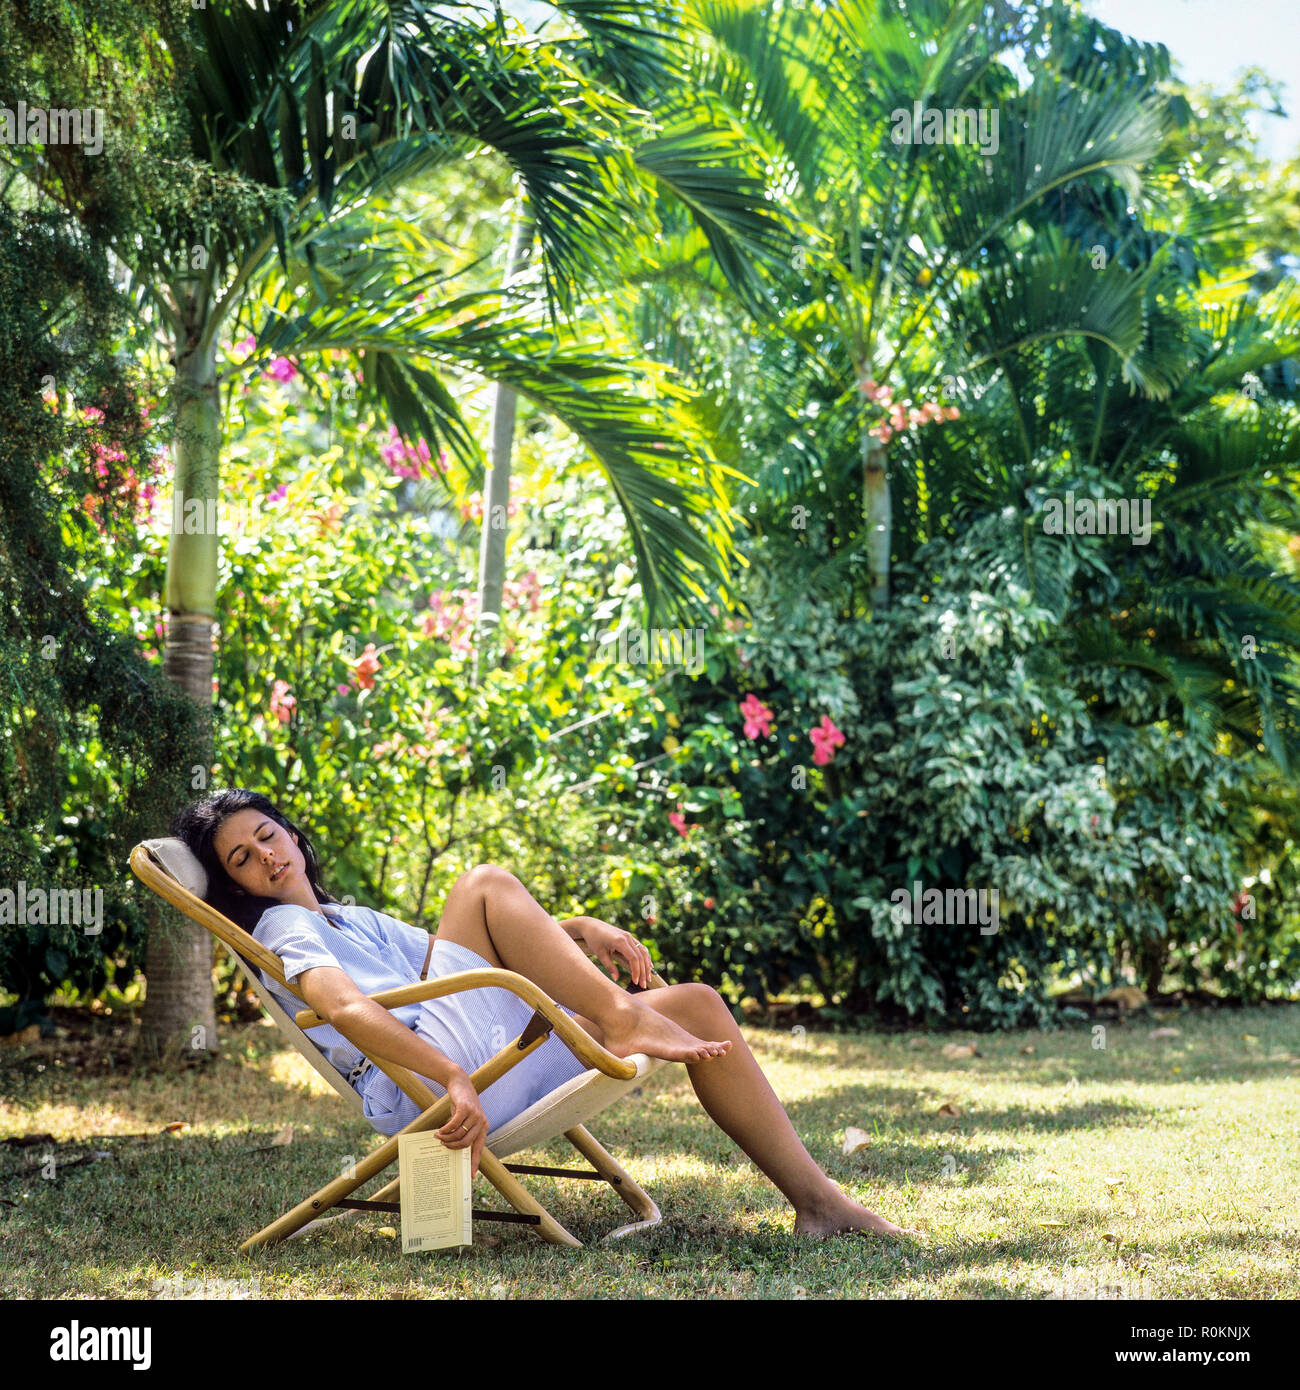 Giovane donna napping in sedia a sdraio, giardino tropicale, Guadalupa, French West Indies, Foto Stock